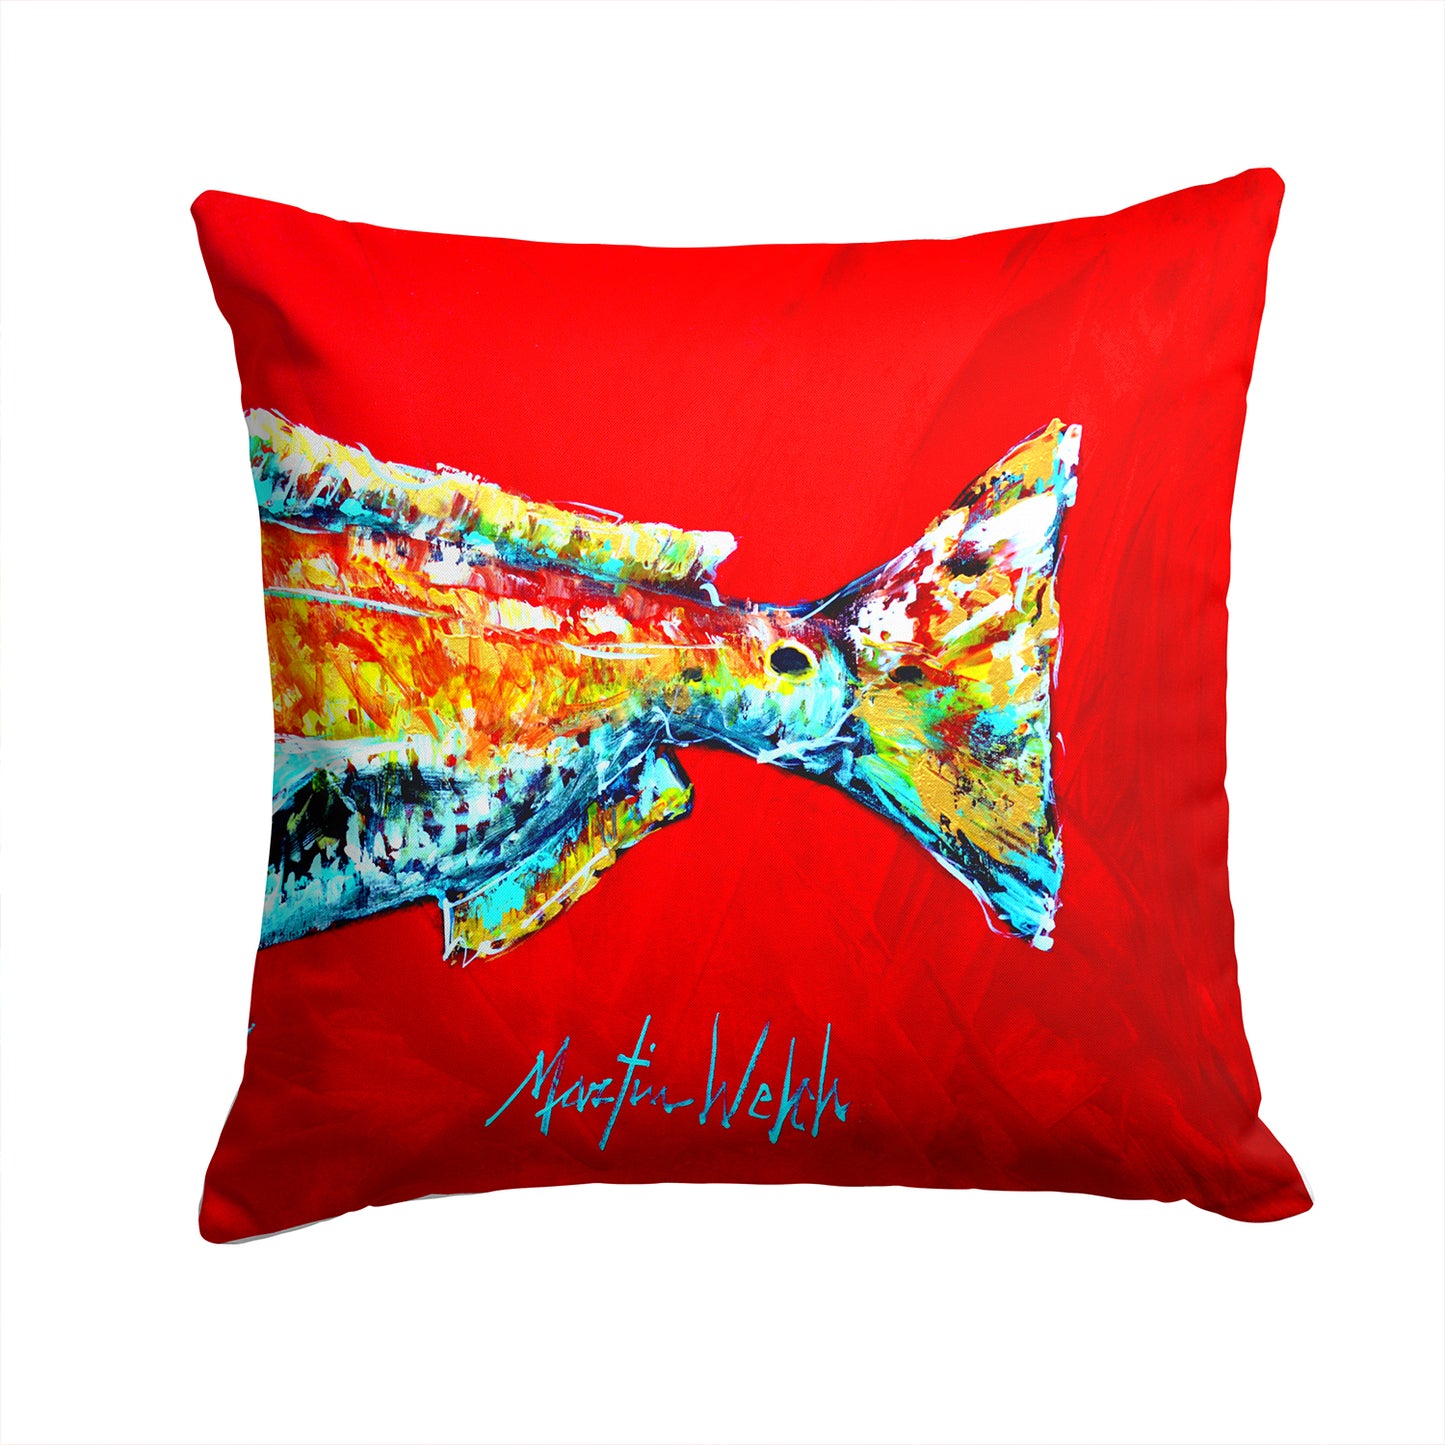 Buy this Red Fish Alphonzo Tail Fabric Decorative Pillow